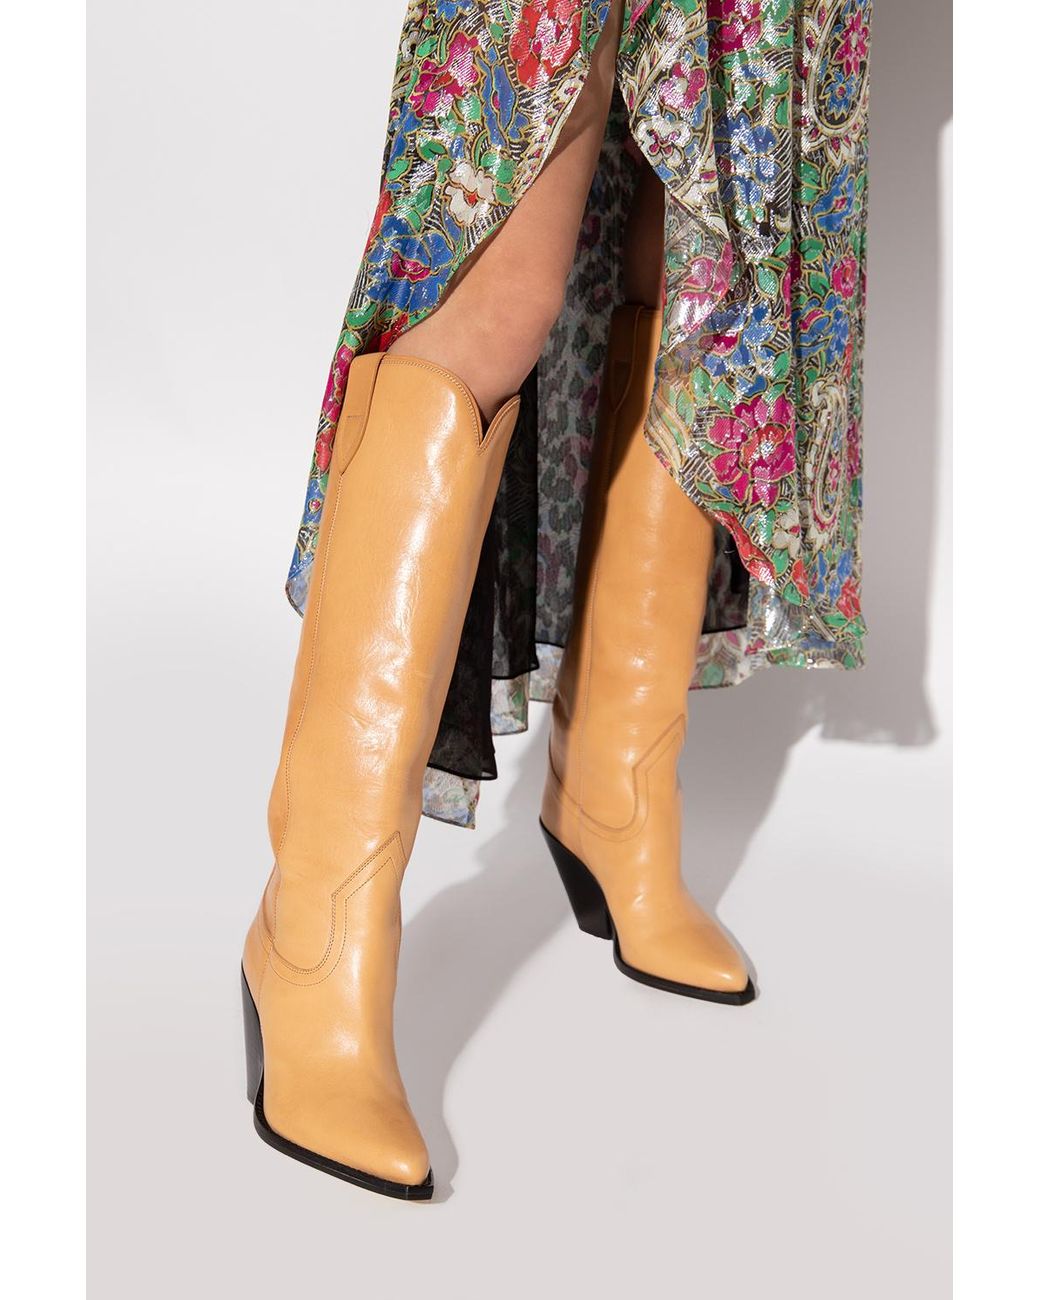 Isabel Marant 'lomero' Leather Boots in Natural | Lyst